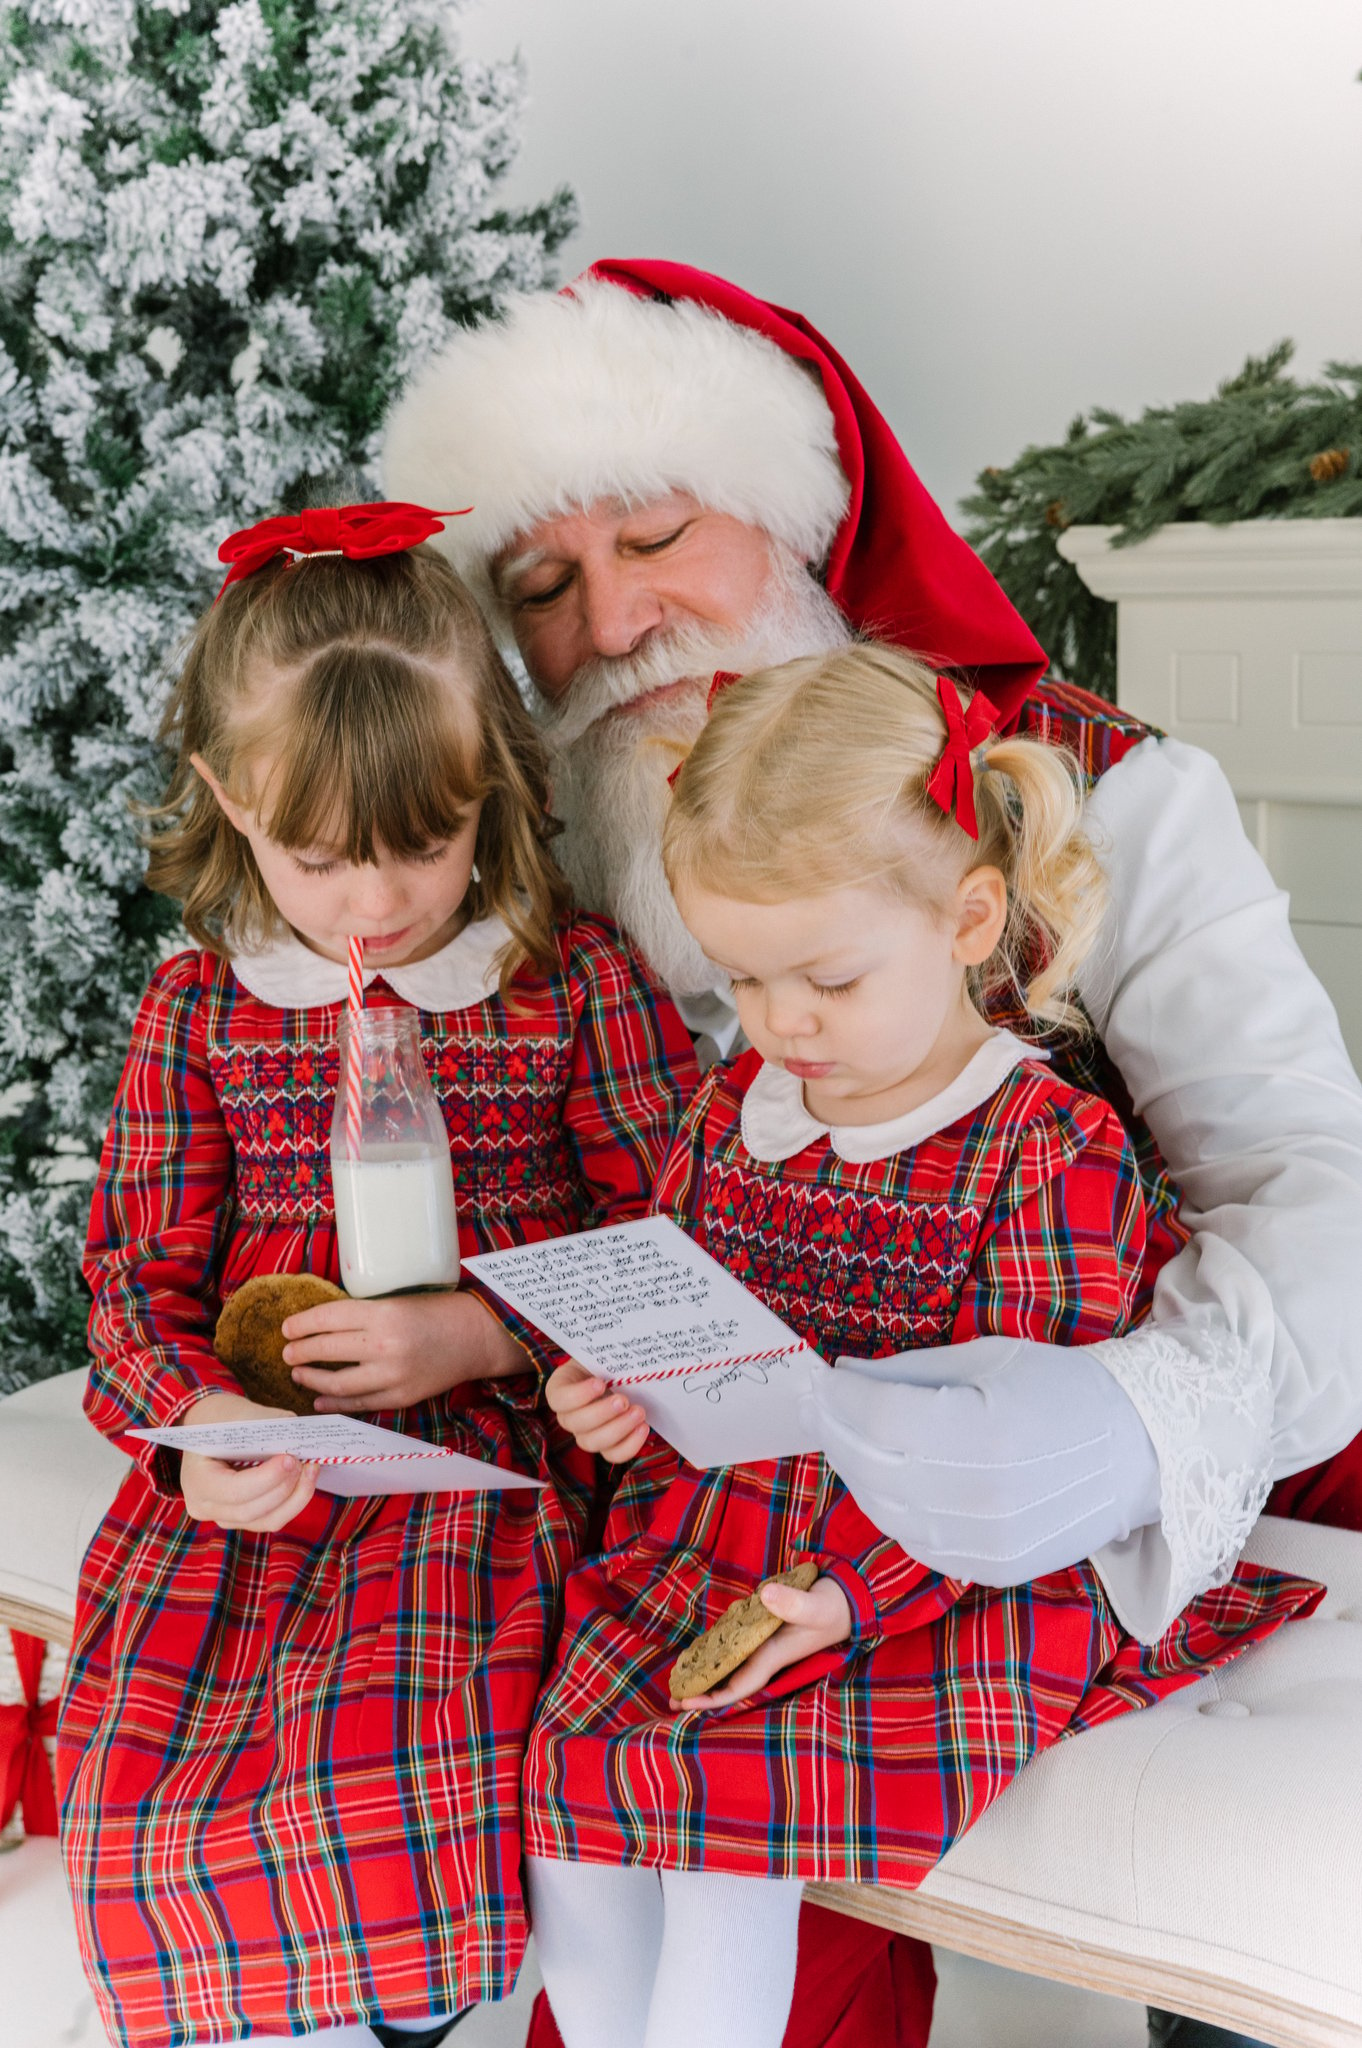 Christmas in Dallas with Santa and two young girls reading a letter from Santa and eating milk and cookies.